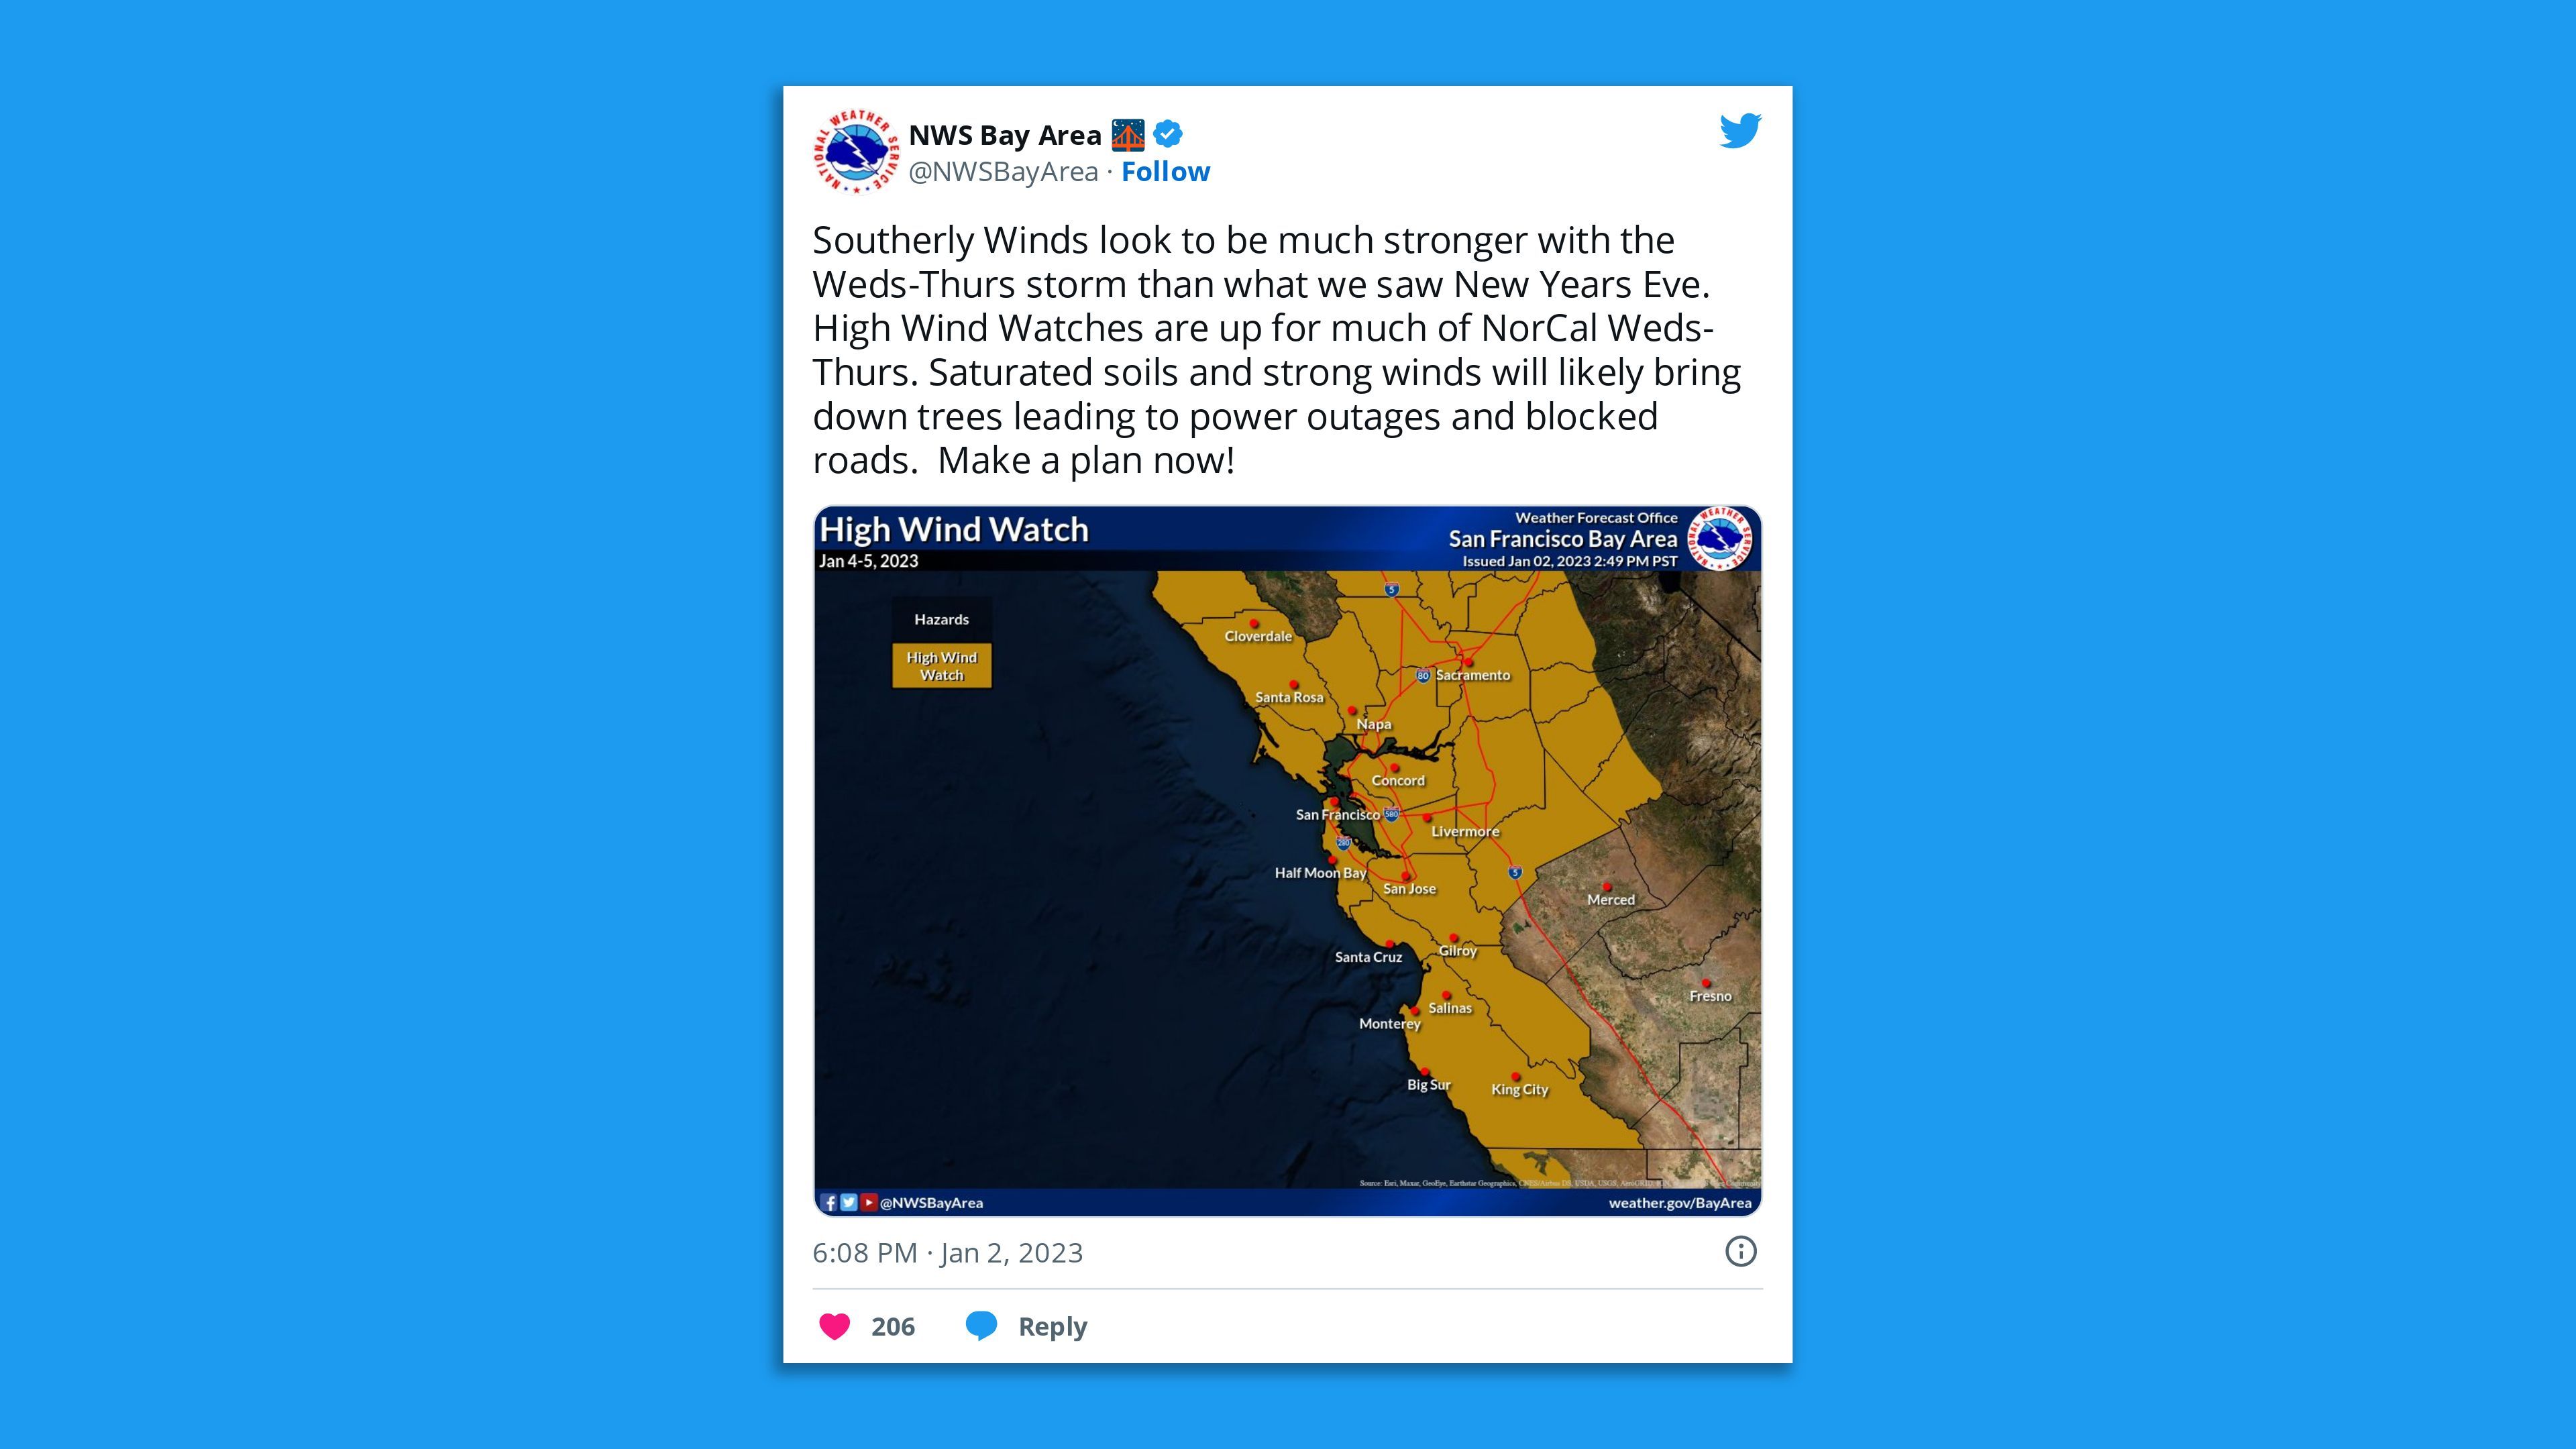 Screenshot of a NWS Bay Area tweet warning of high winds across the region due to storms.